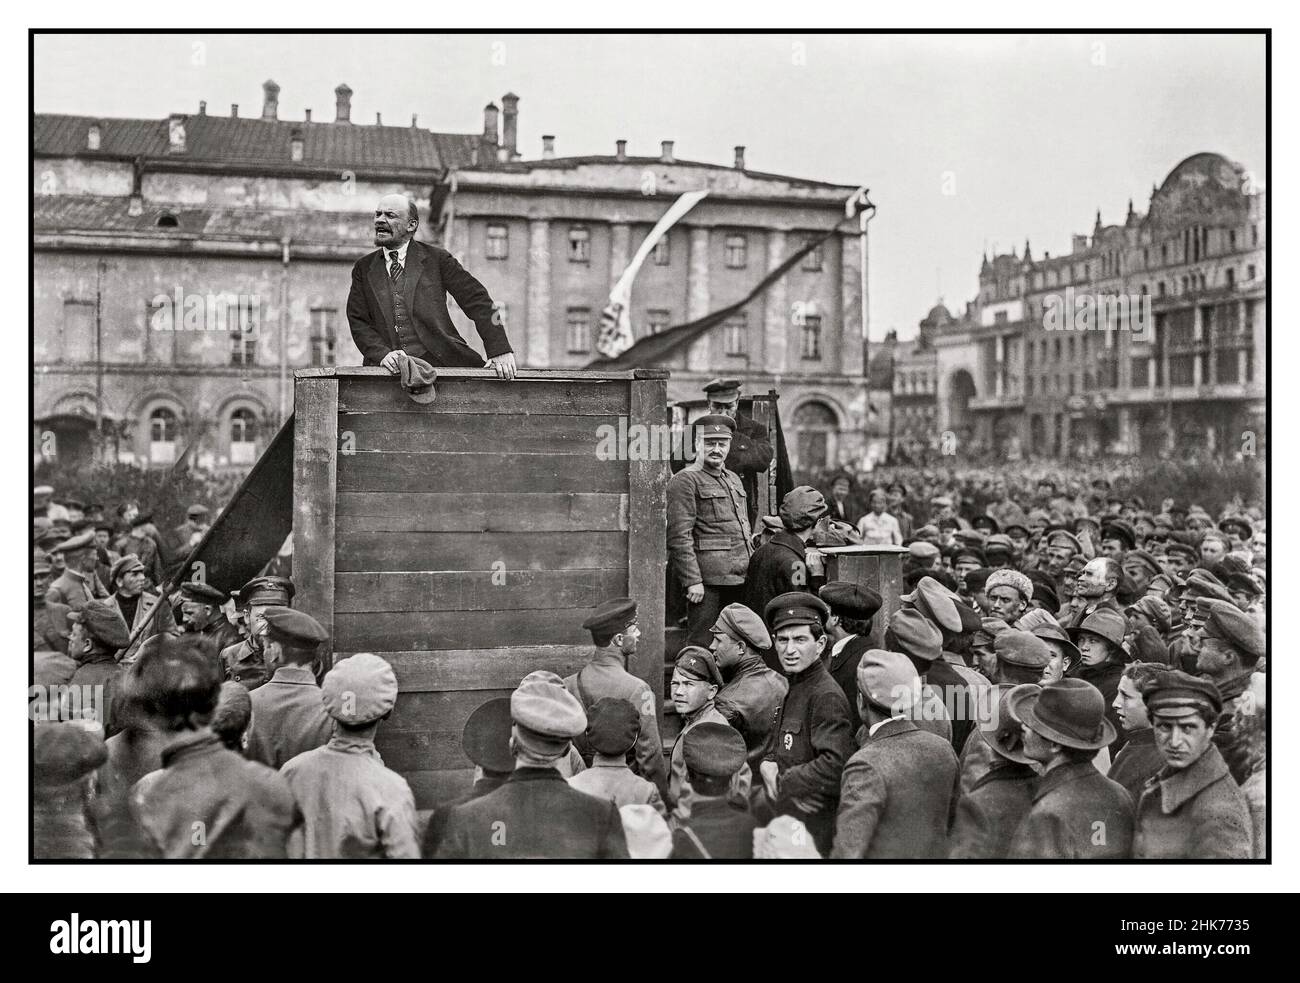 LENIN SPEECH MOSCOW 1919/1920 Vladimir Lenin, in Moscow’s Sverdlov Square in 1920, gives a passionate speech to Red Army members leaving for the front during the Polish-Soviet War  Vladmir Lenin addresses crowds of Petrograd workers in 1919. On the right stands Trotsky. Stock Photo